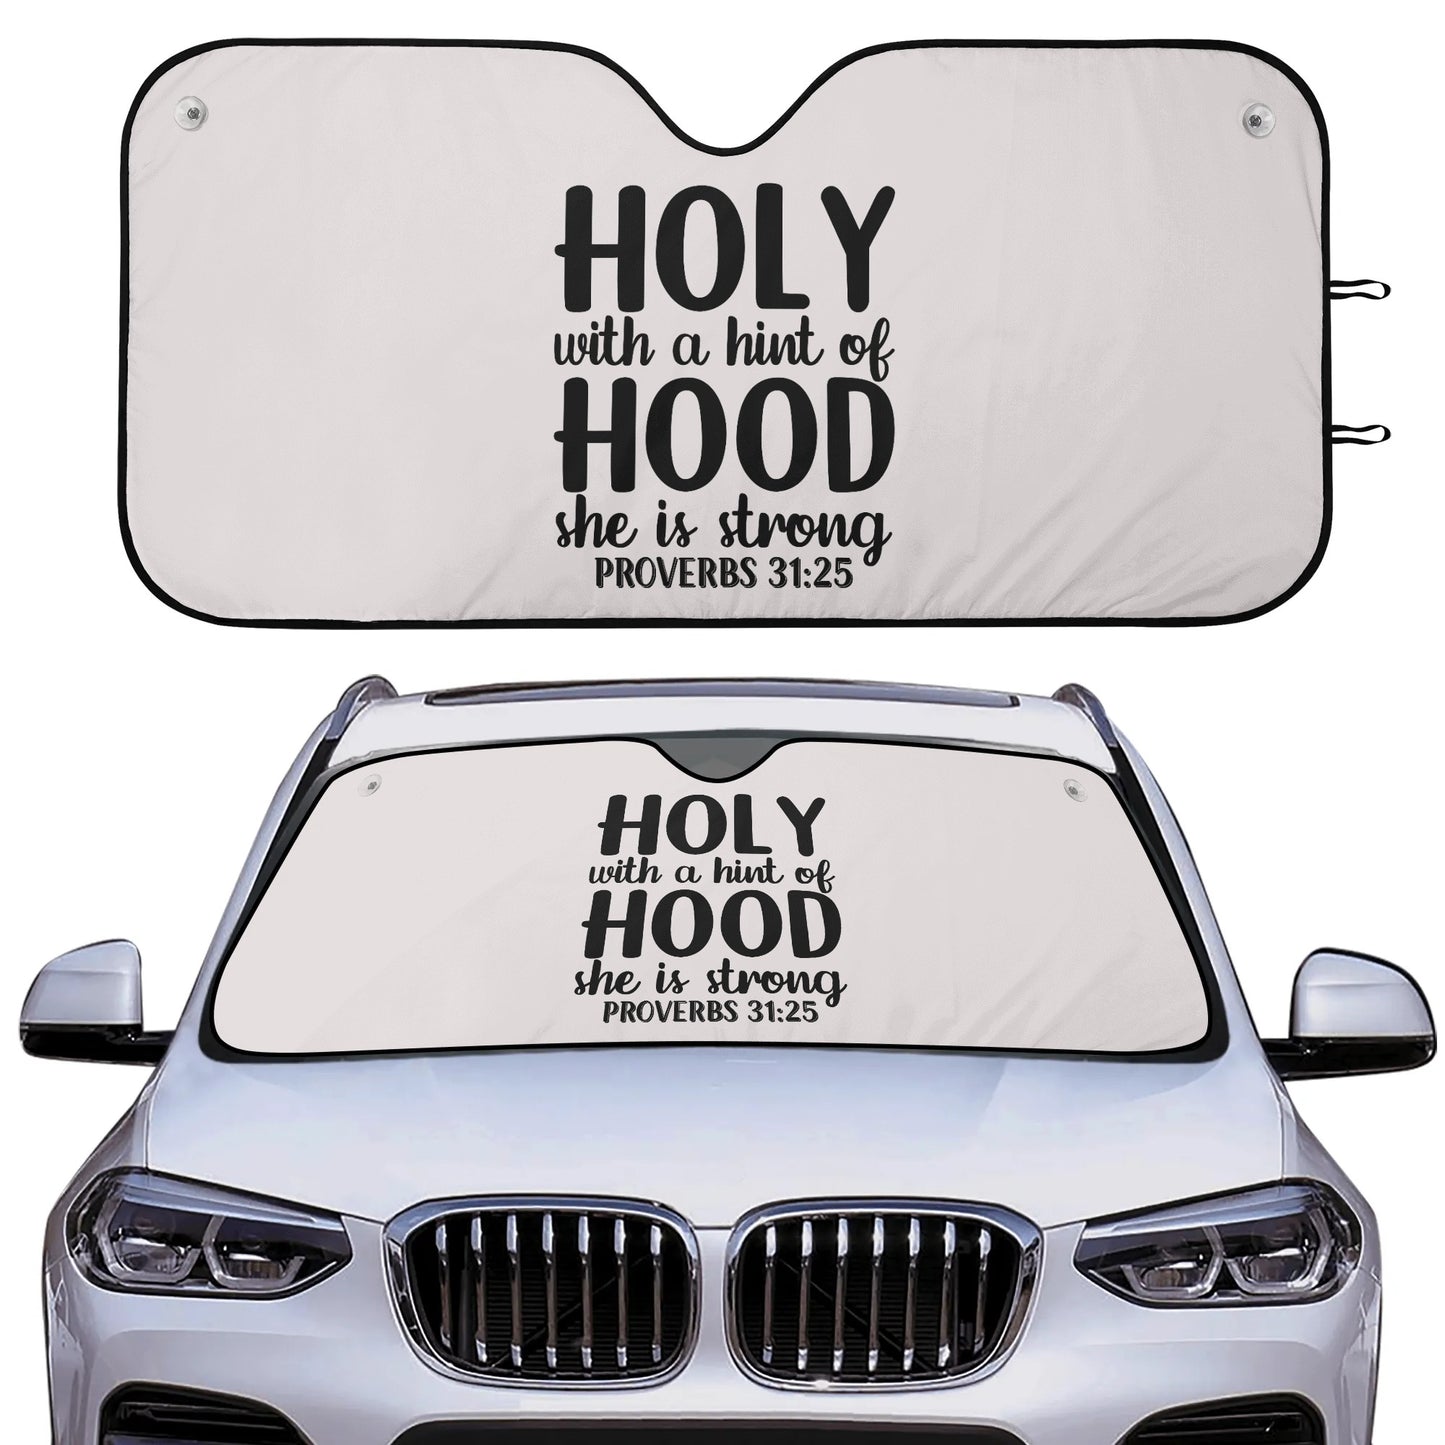 Holy With A Hint Of Hood She Is Strong Car Sunshade Christian Car Accessories popcustoms